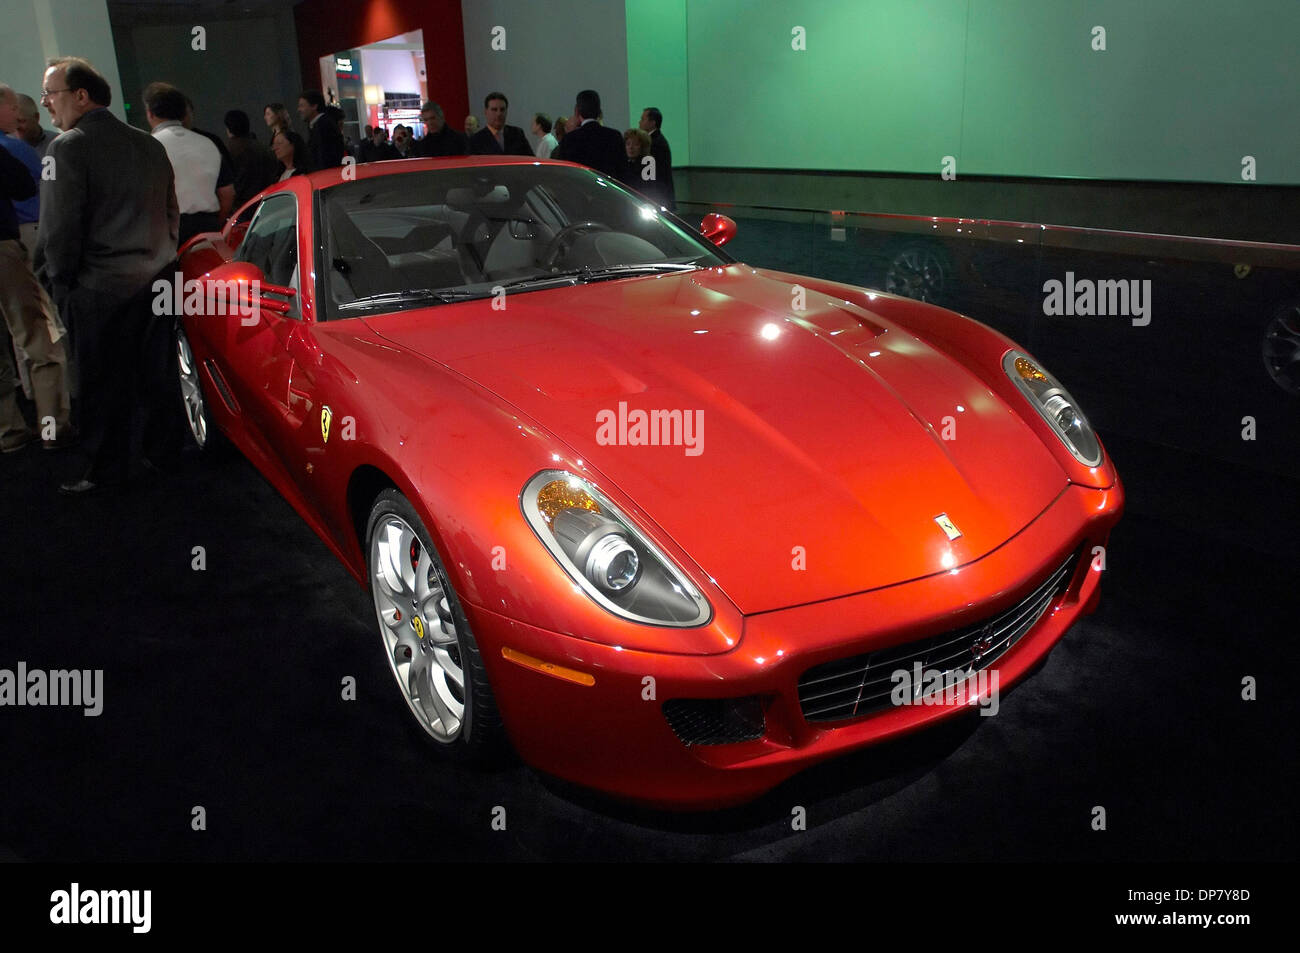 Nov 30, 2006; Los Angeles, CA, USA; The Ferrari 599 GTB Fiorano at the LA Auto Show 2007, the 100th Anniversary of the event, held at the Los Angeles Convention Center. Mandatory Credit: Photo by Stan Sholik/ZUMA Press. (©) Copyright 2006 by Stan Sholik Stock Photo